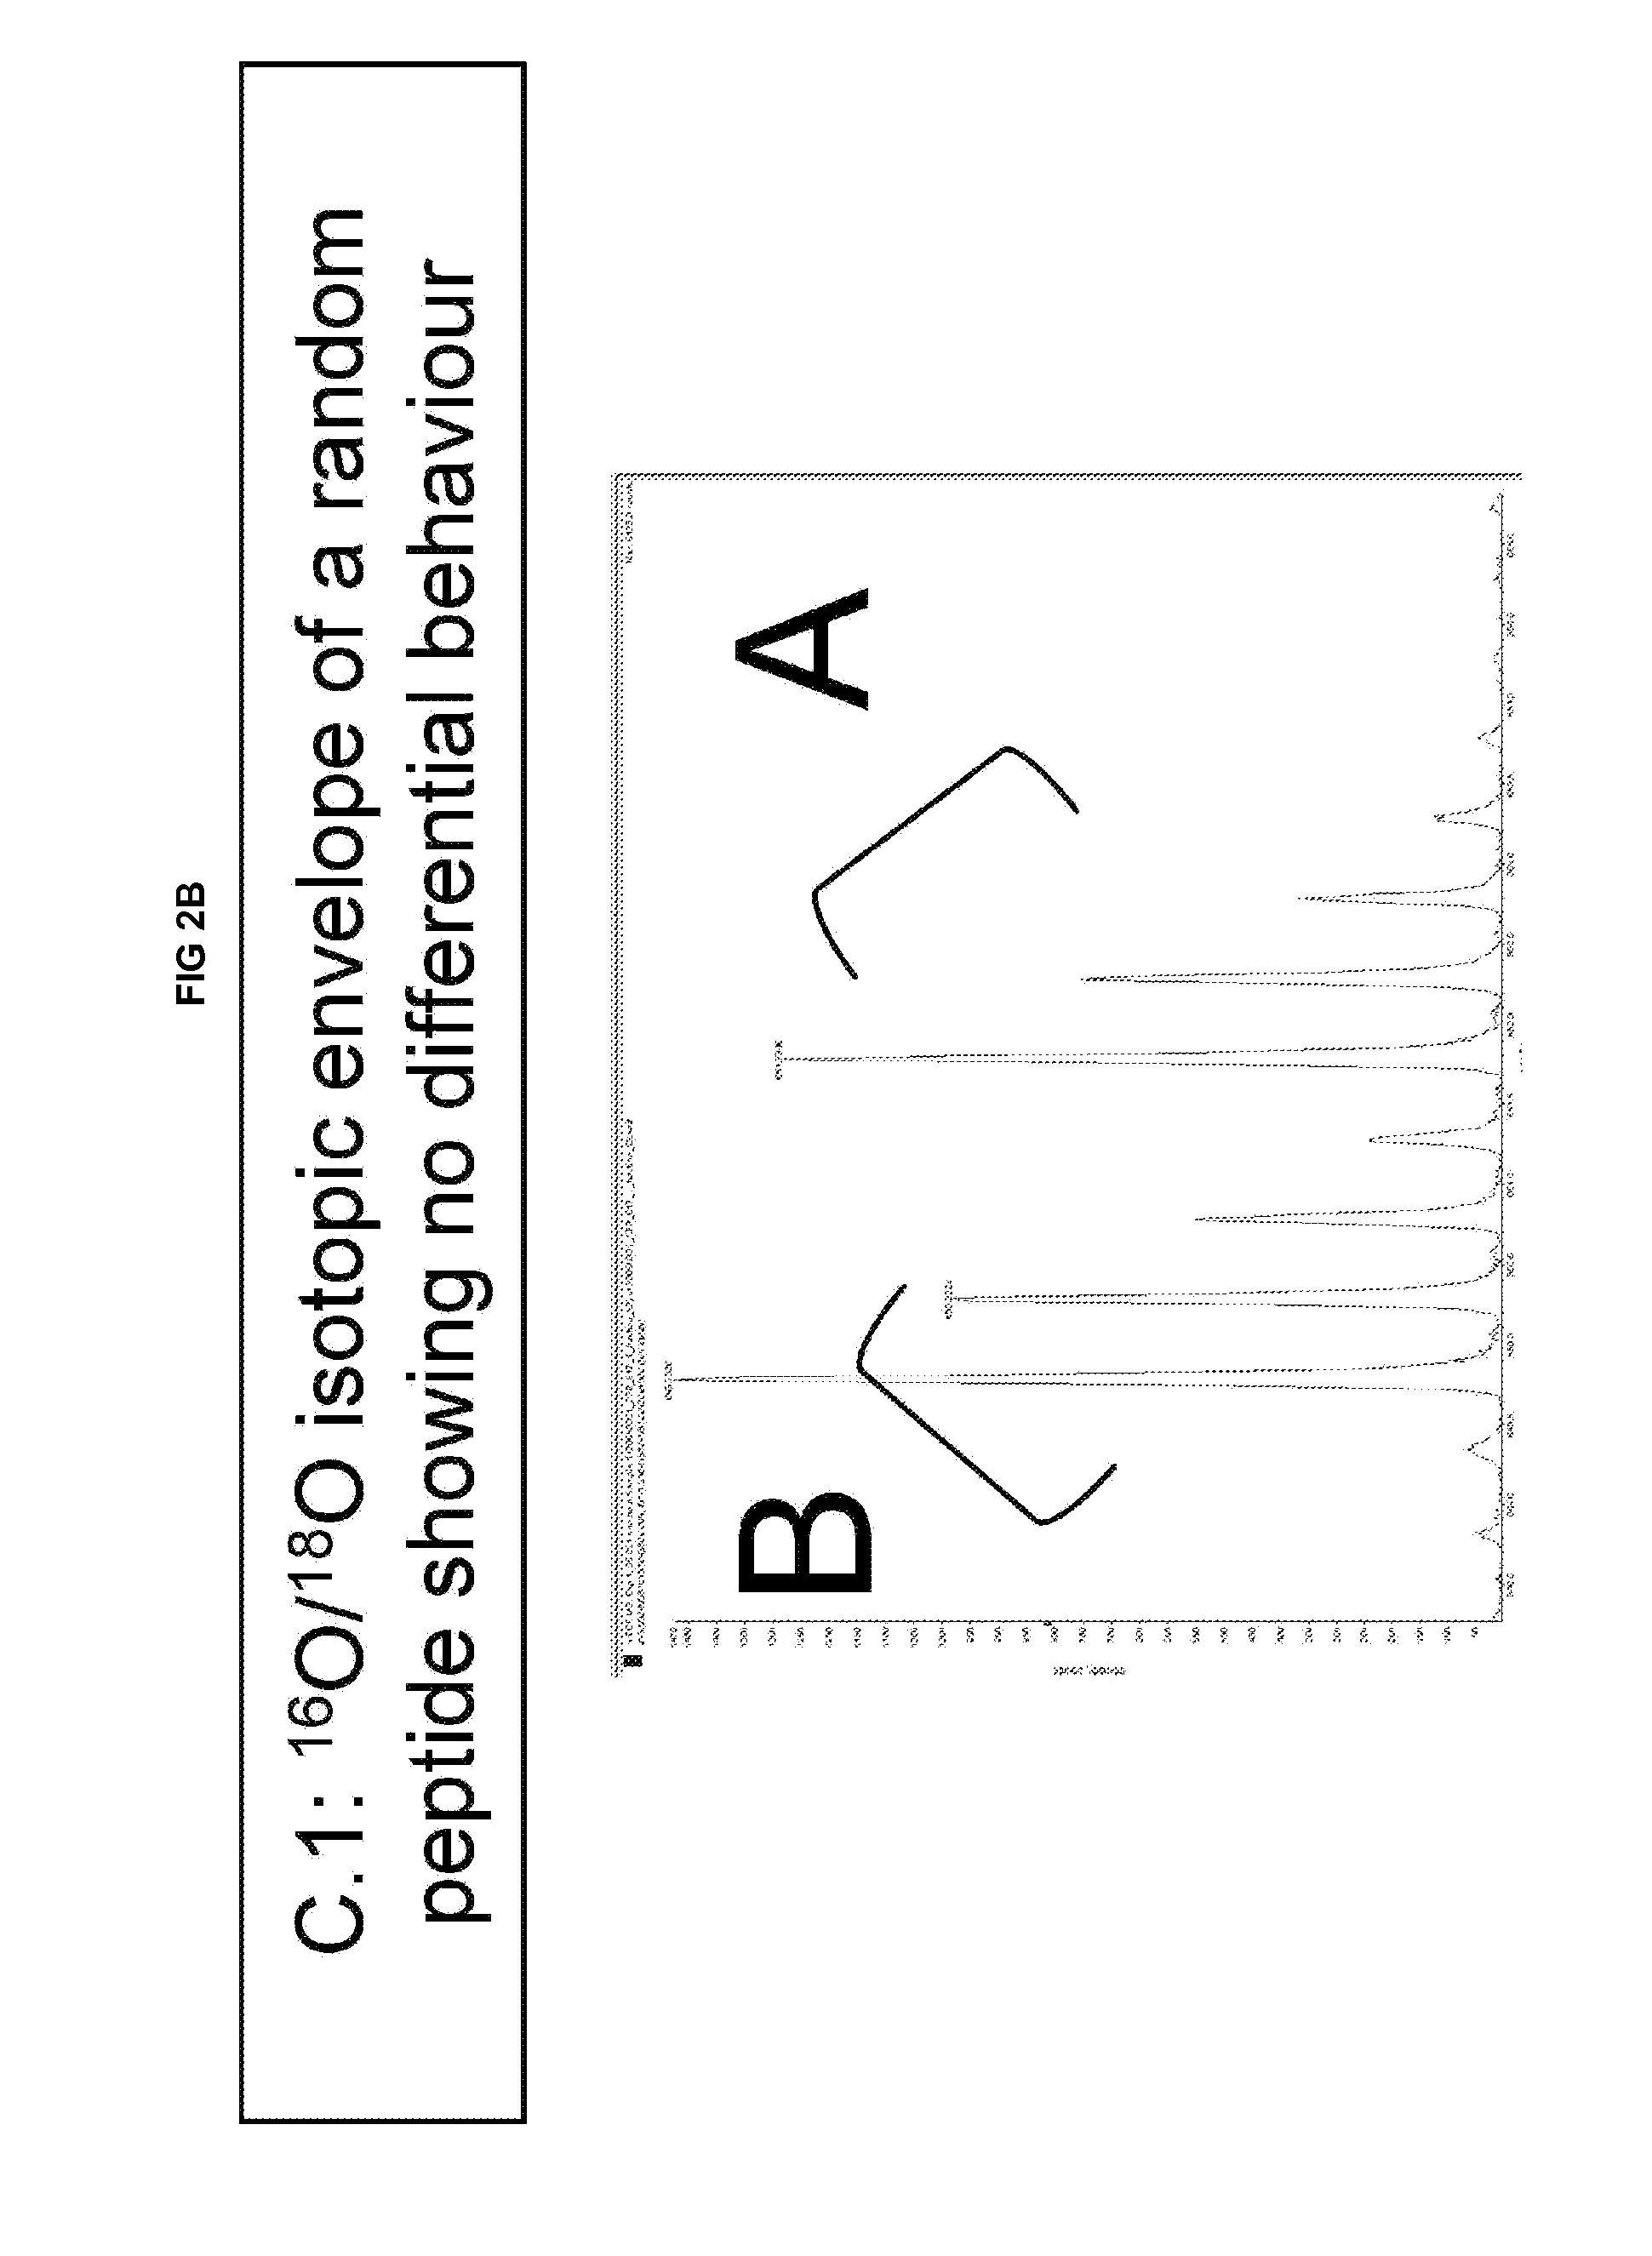 Novel polypeptides related to b-type natriuretic peptides and methods of their identification and use